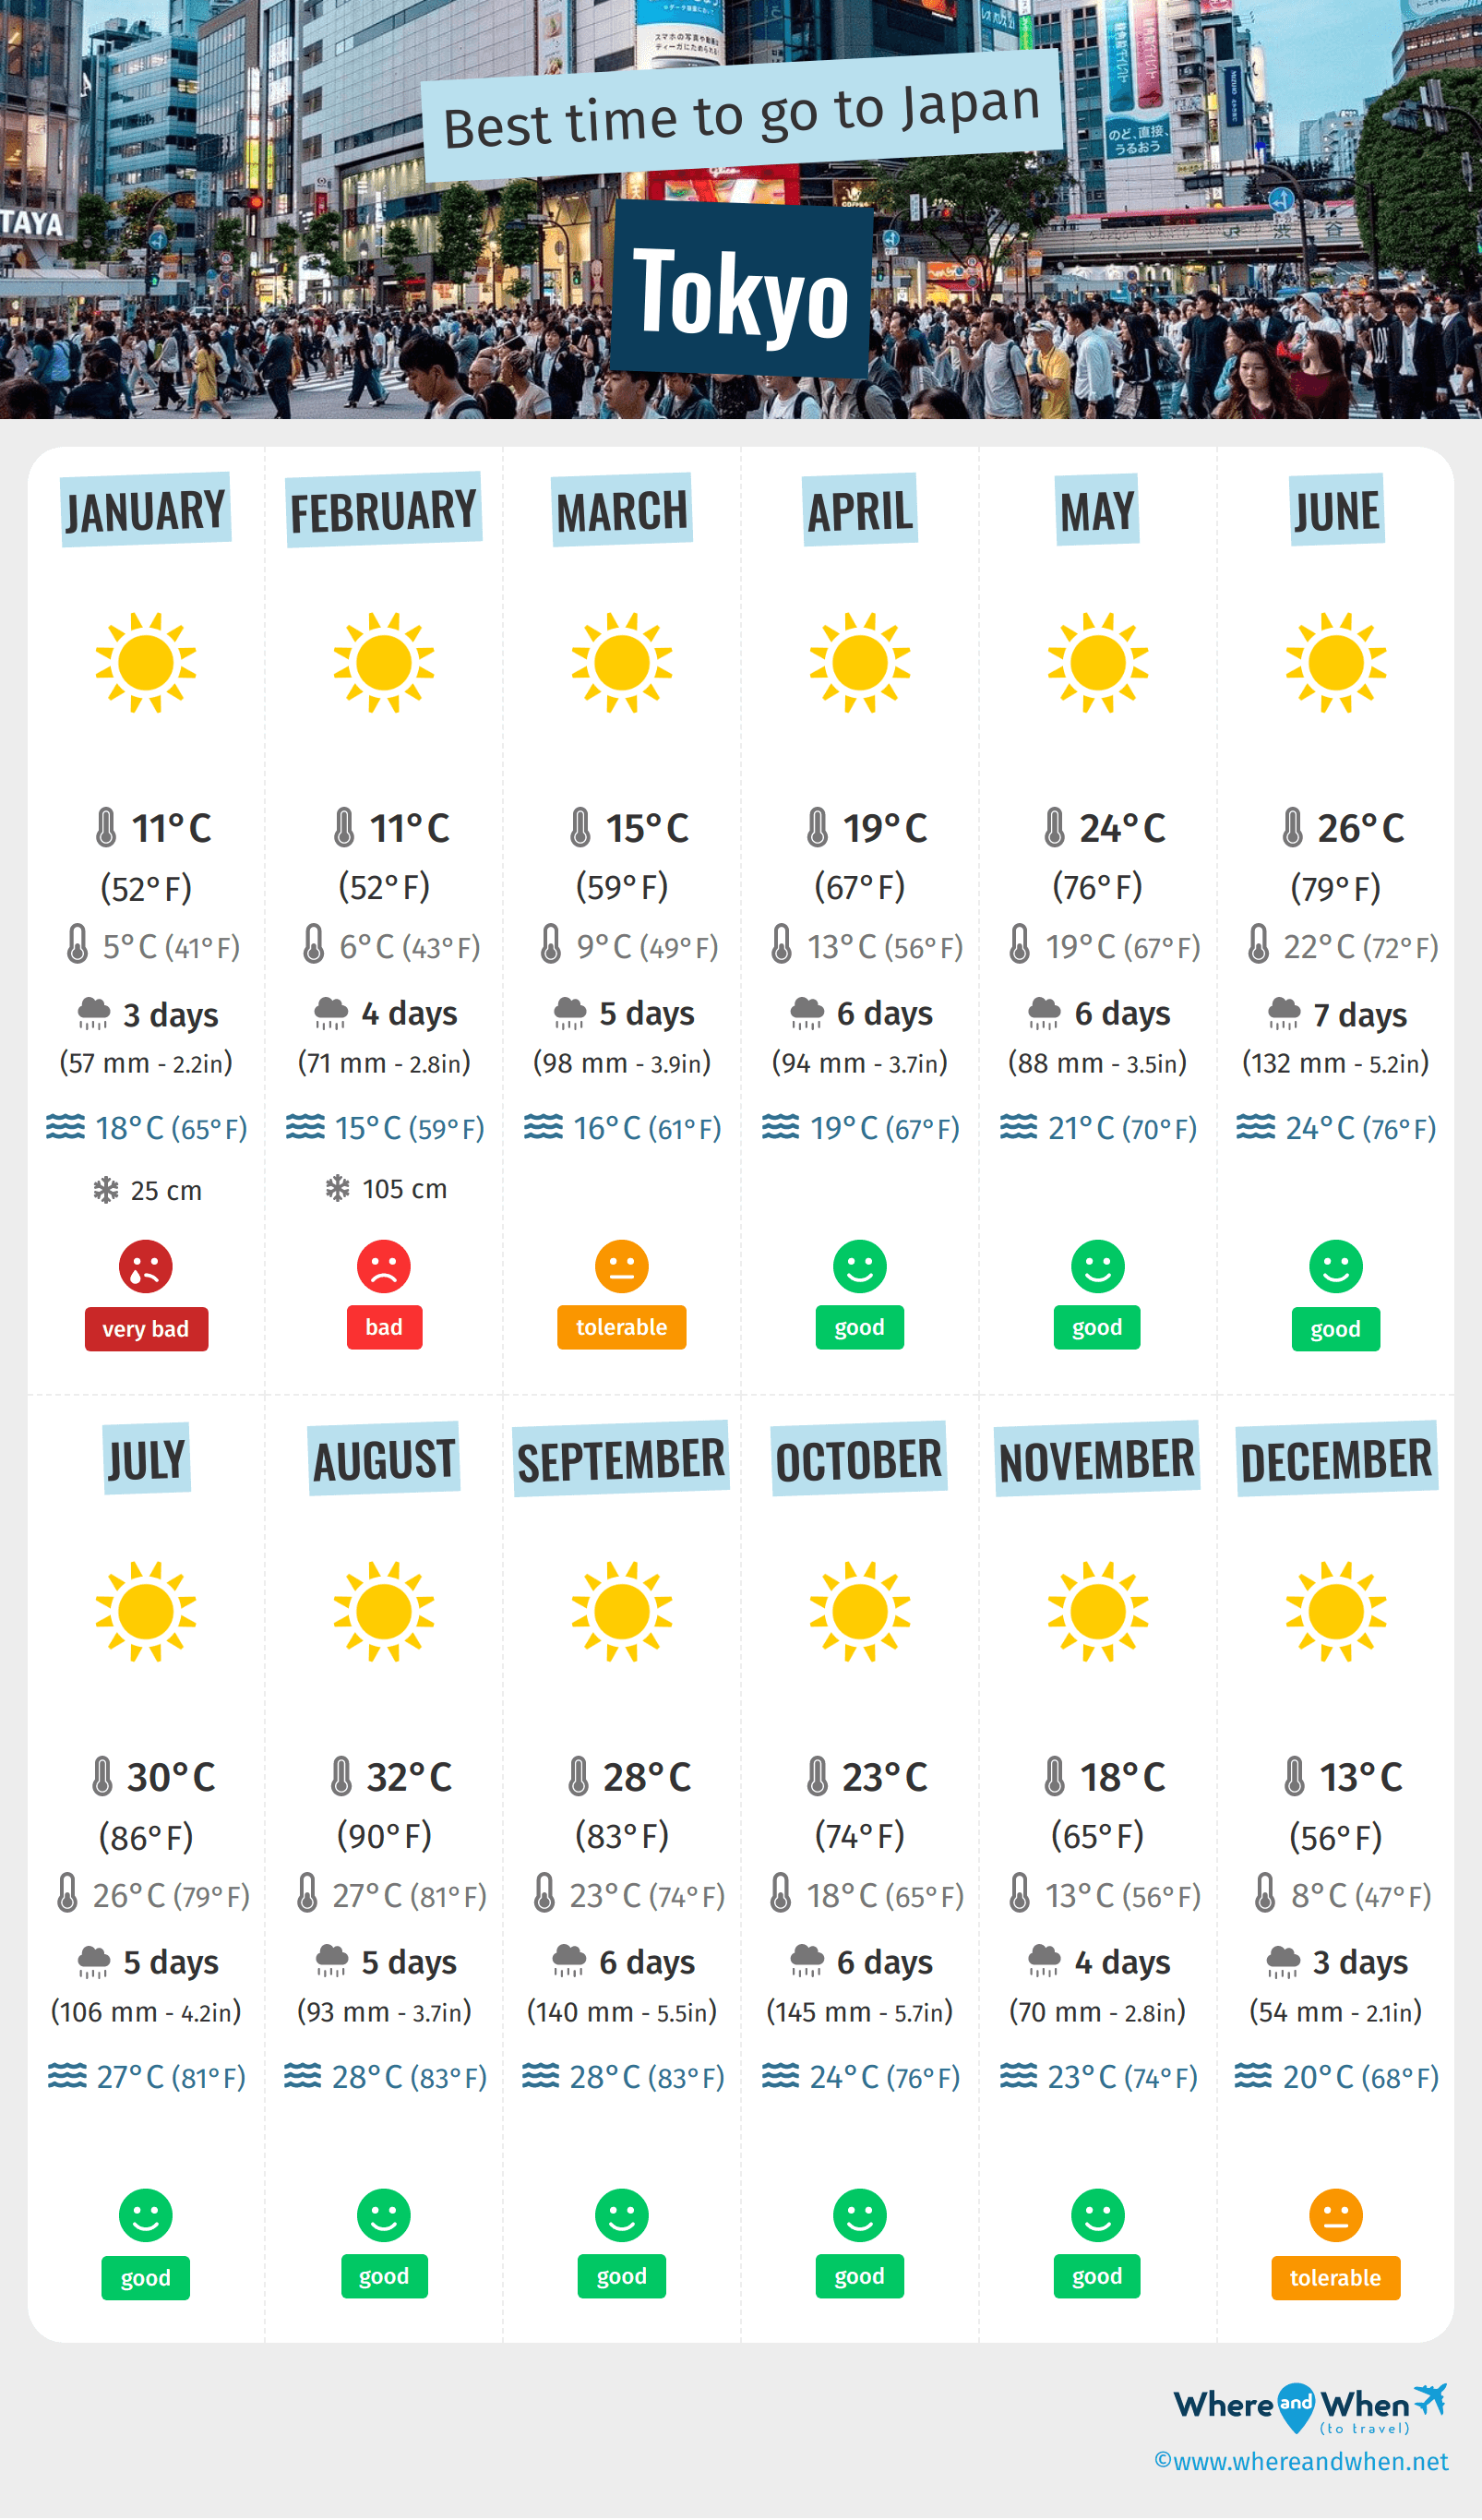 BEST TIME TO VISIT TOKYO - Good weather, shopping, & holiday